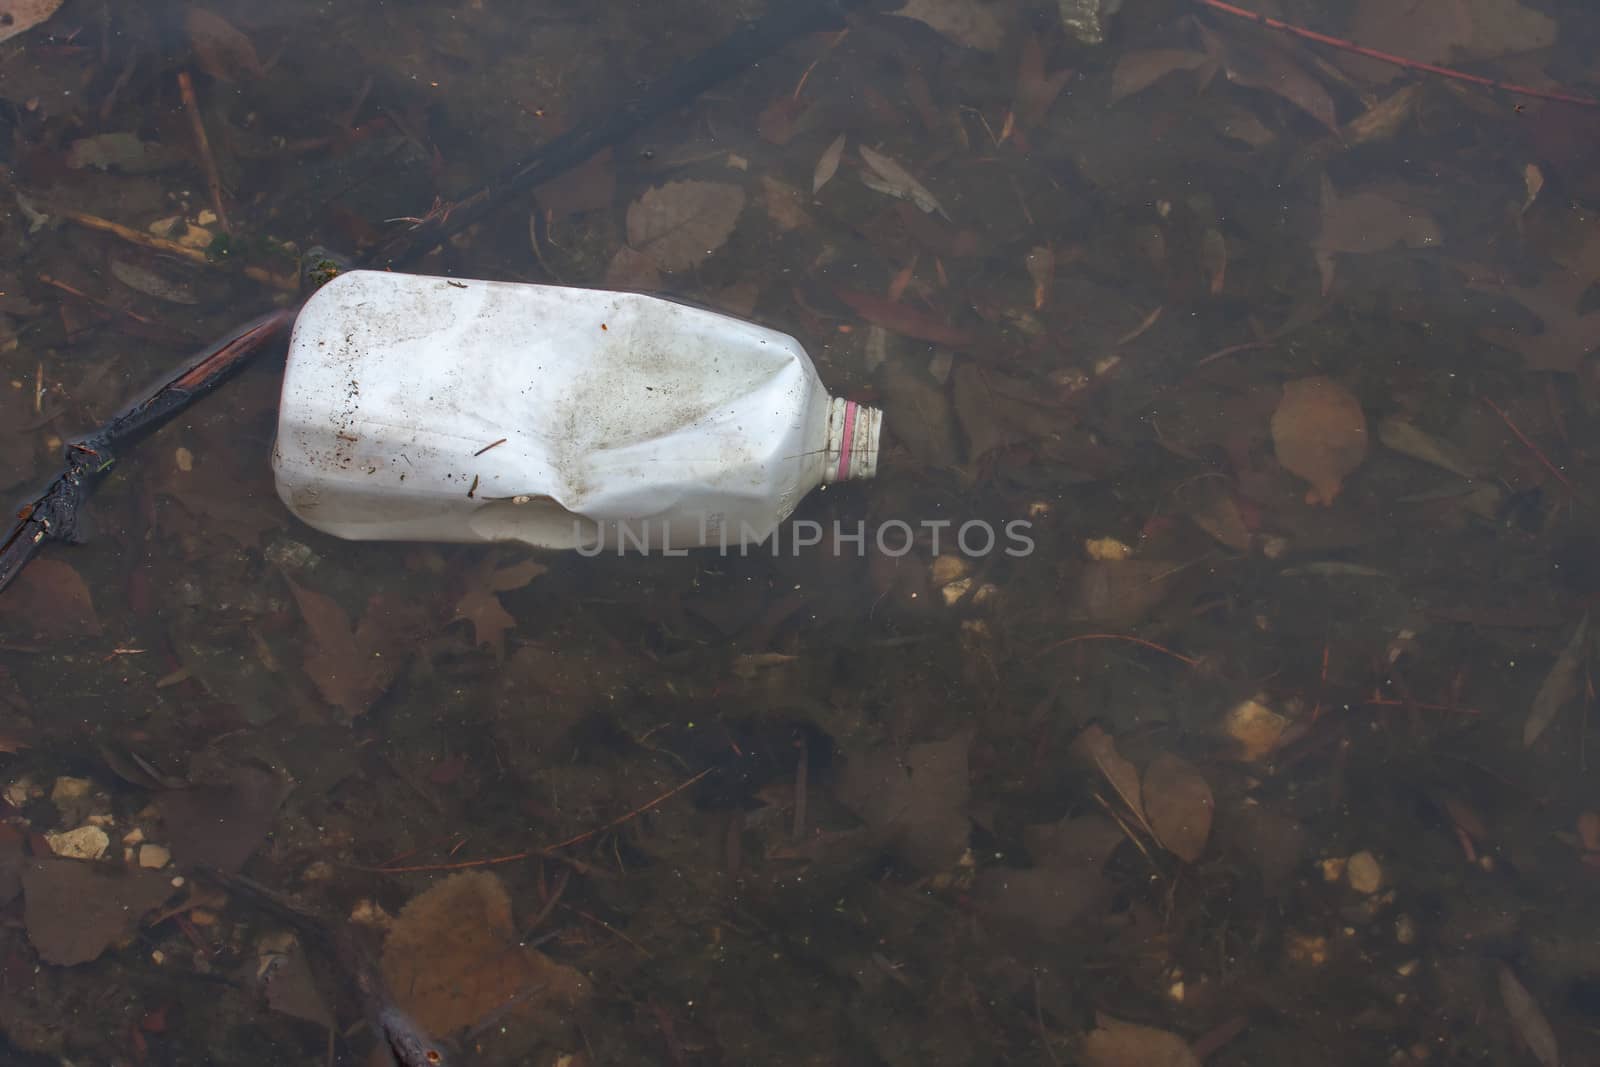 Bottle floating in a pond, pollution and litter.